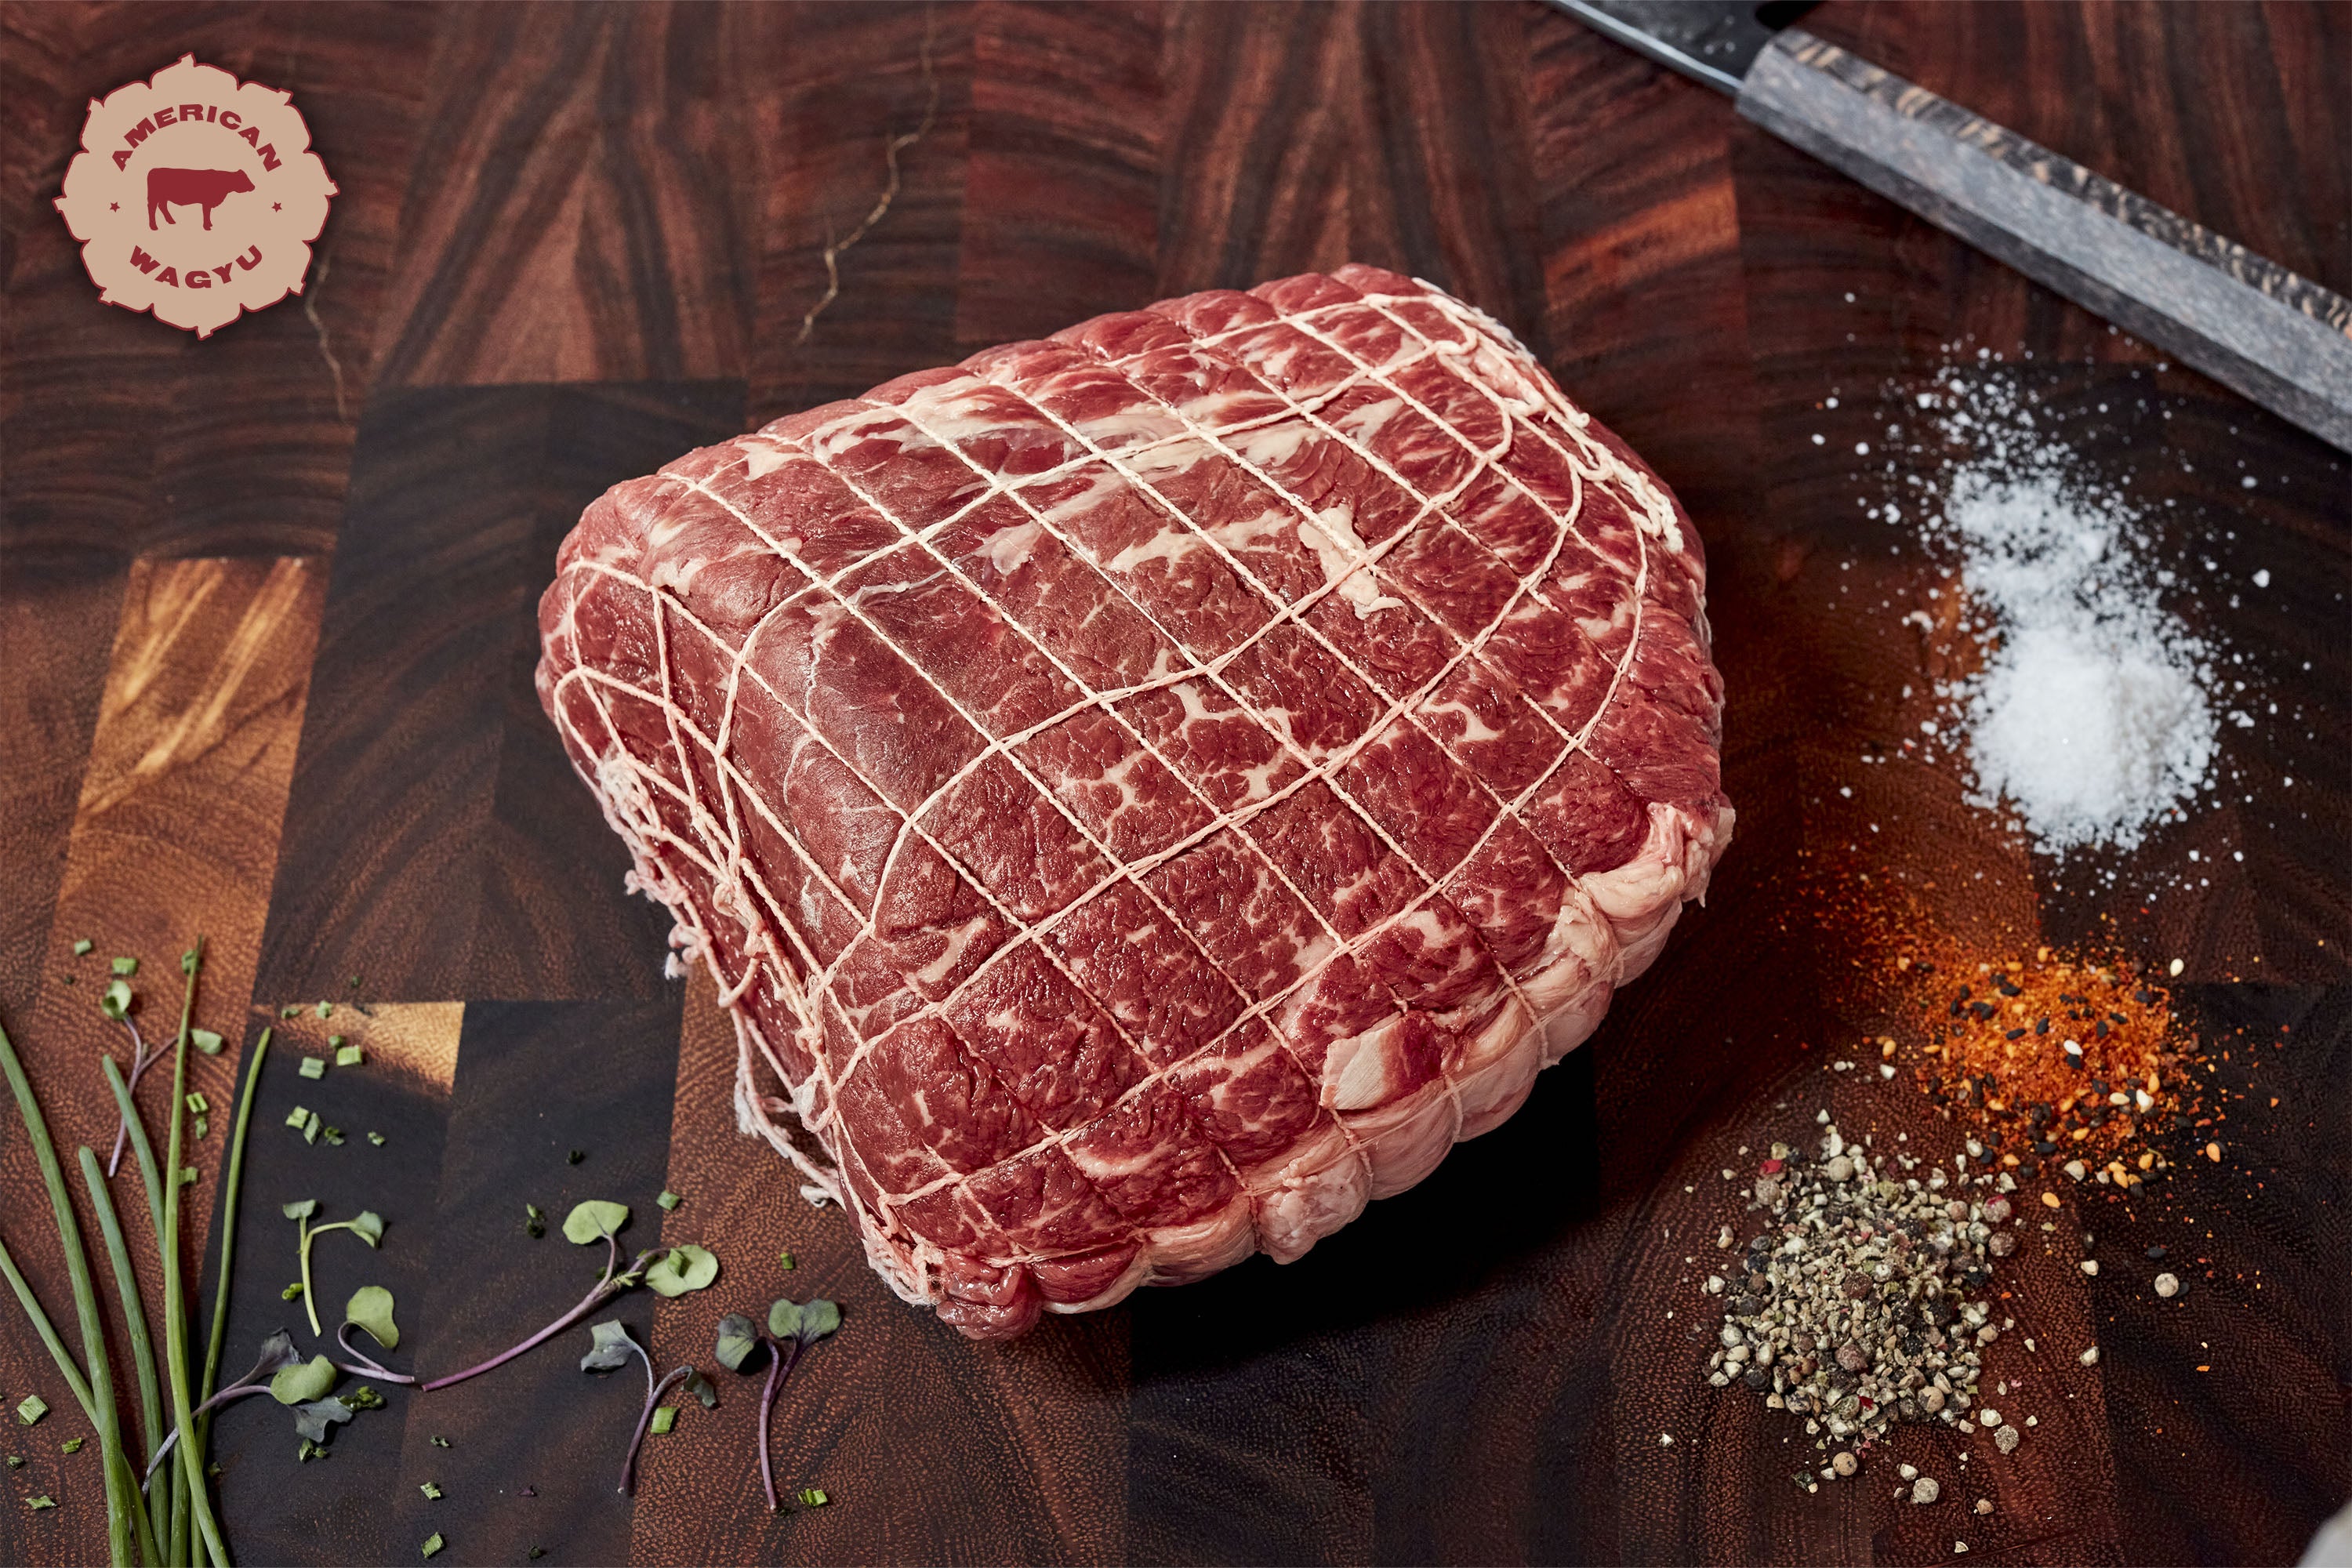 Raw, netted Wagyu beef roast on a wooden cutting board with spices and herbs nearby.